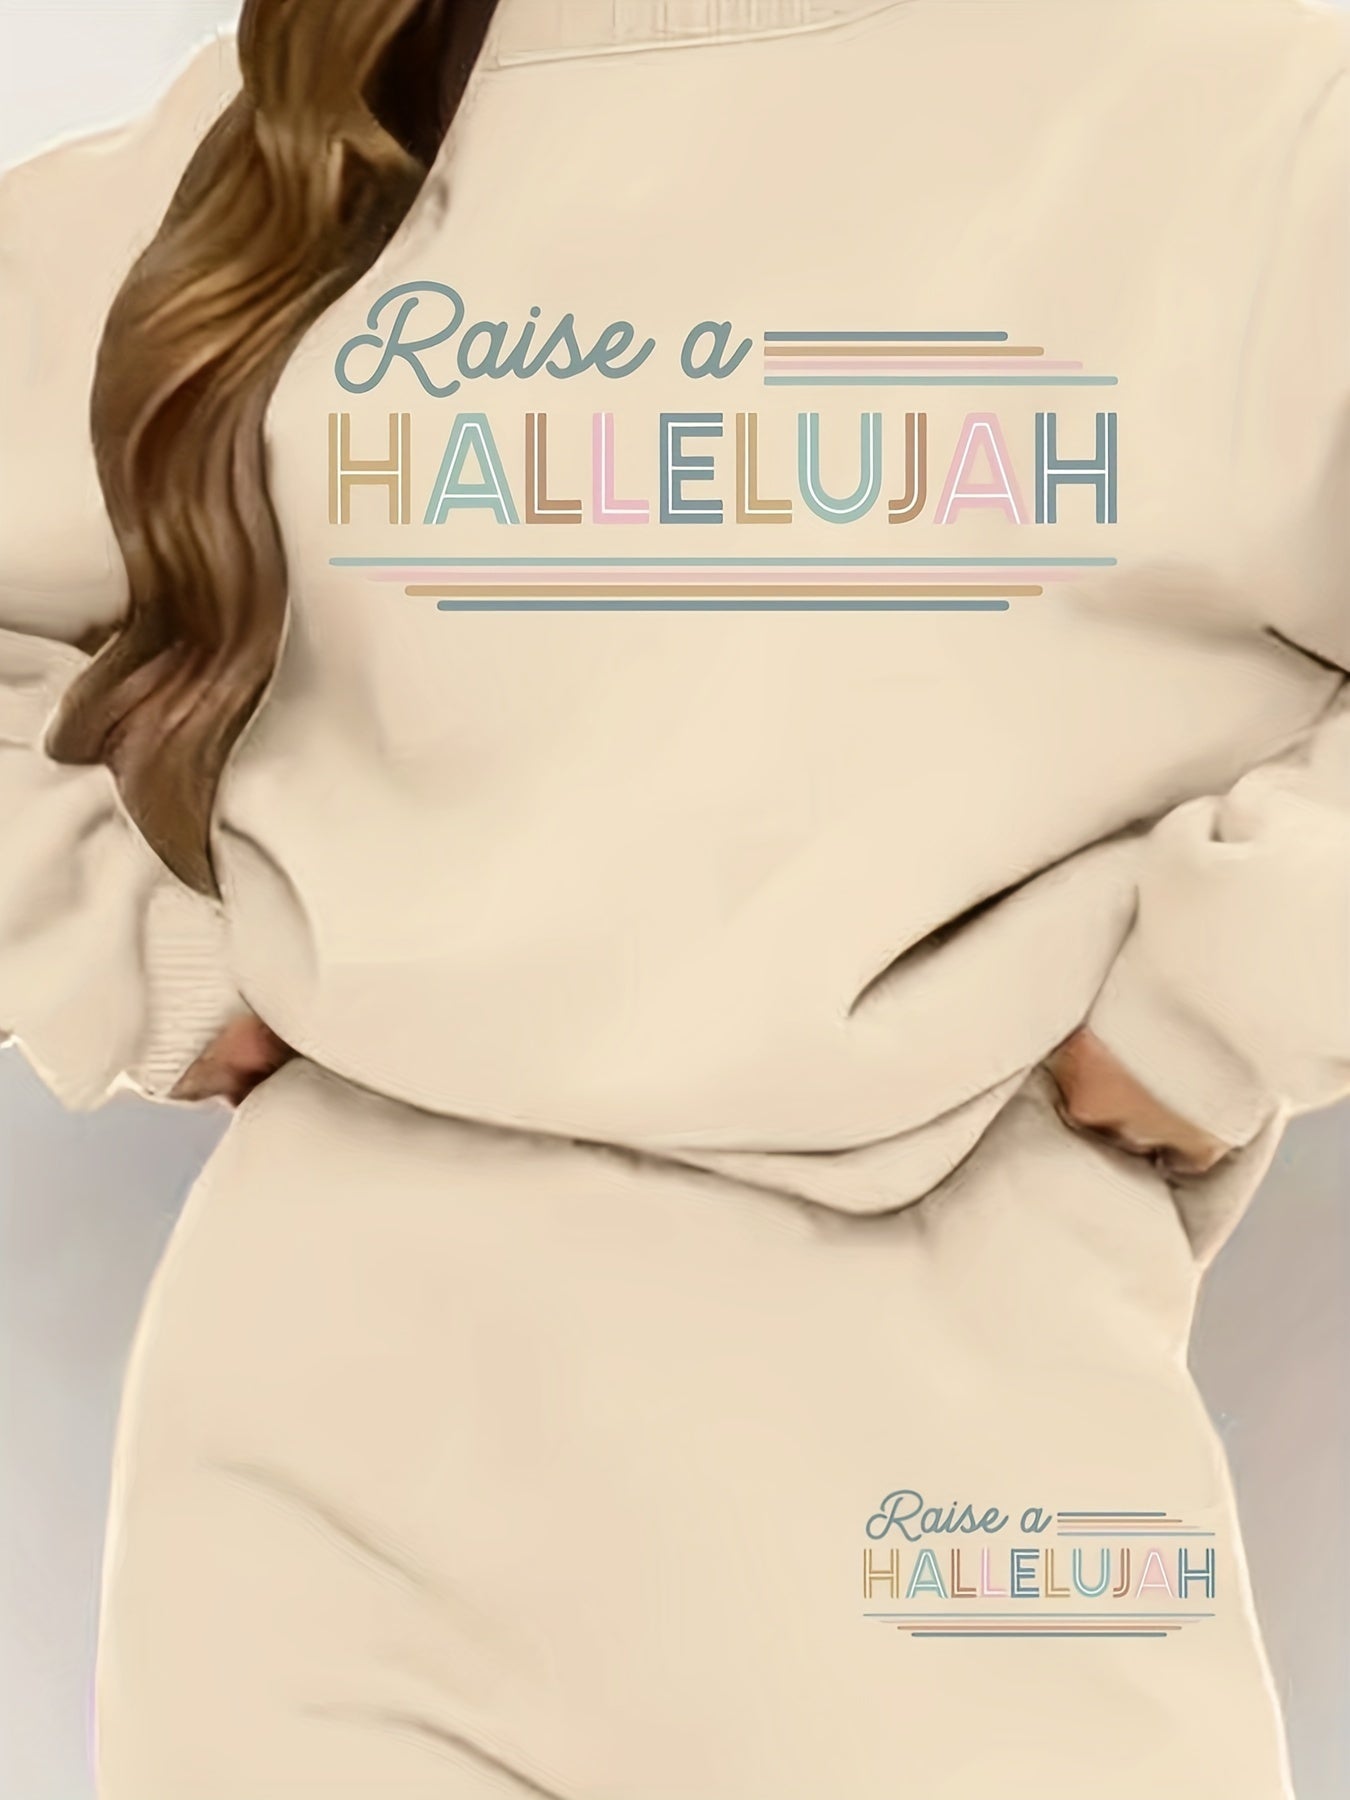 Raise A Hallelujah Women's Christian Casual Outfit claimedbygoddesigns